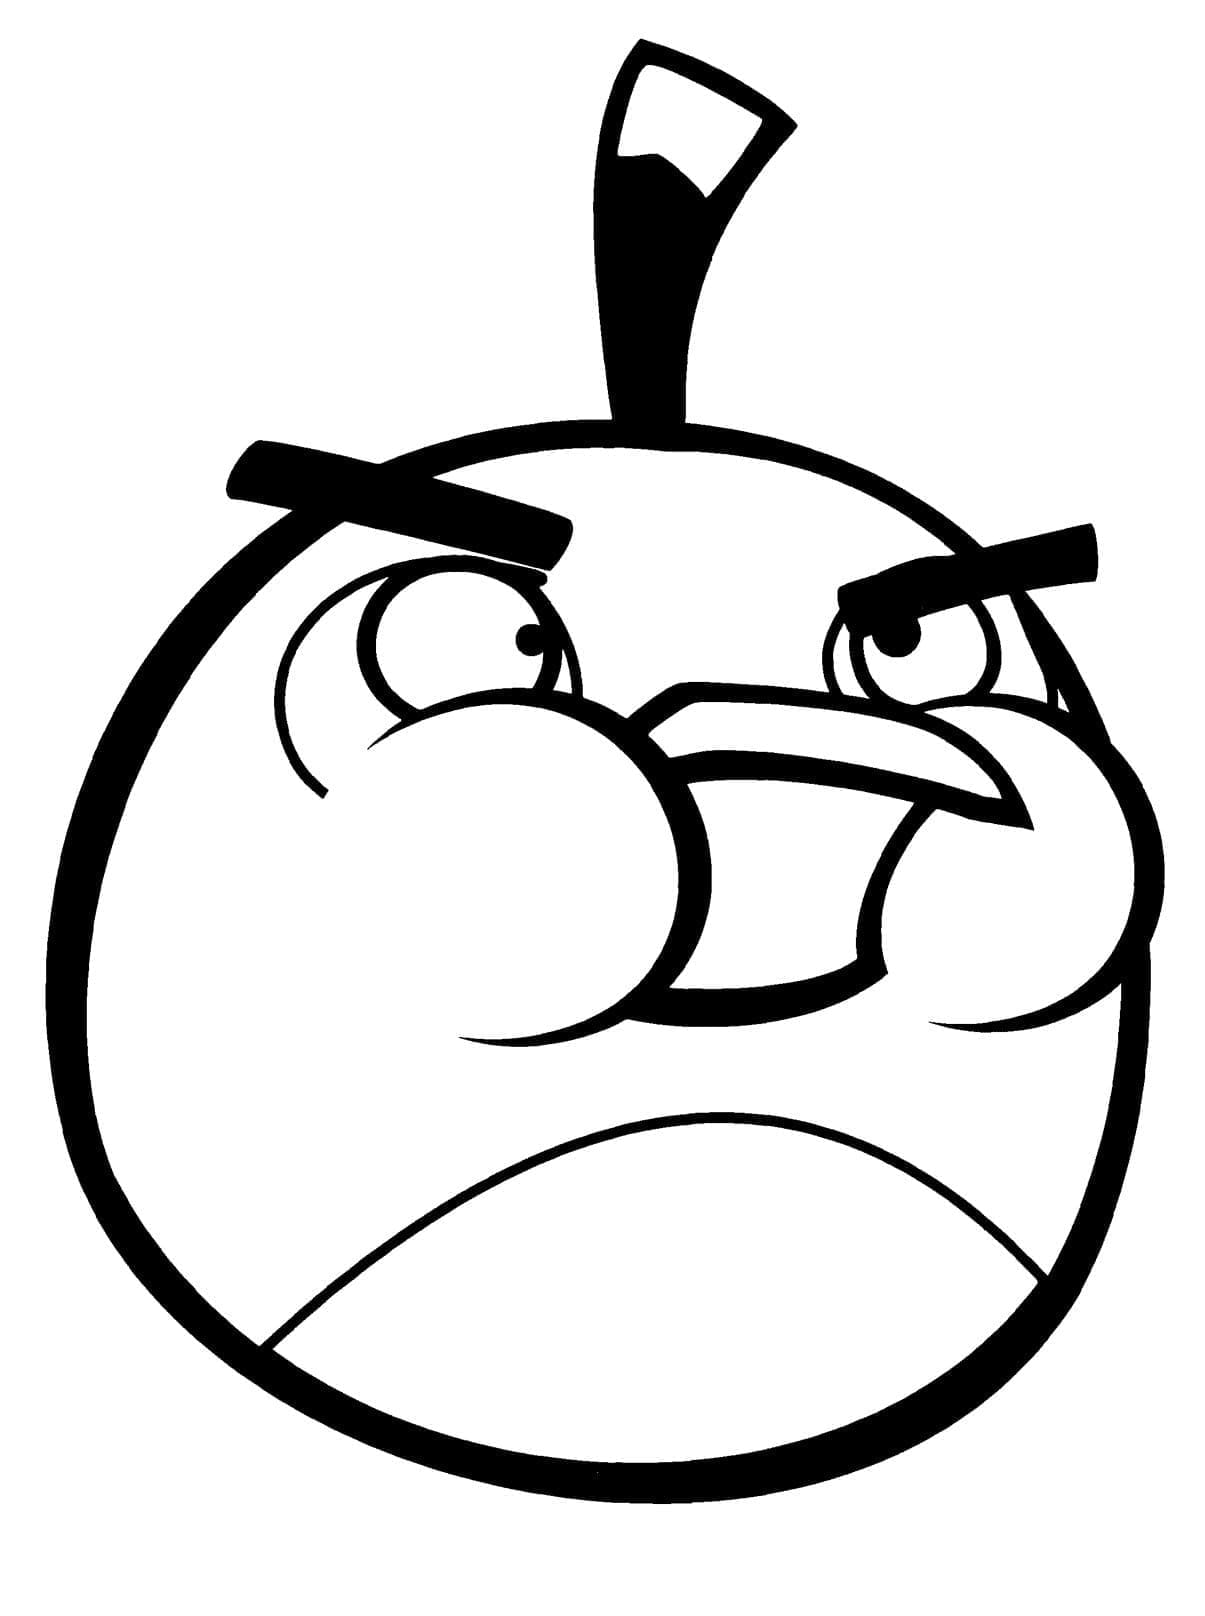 Angry birds p55